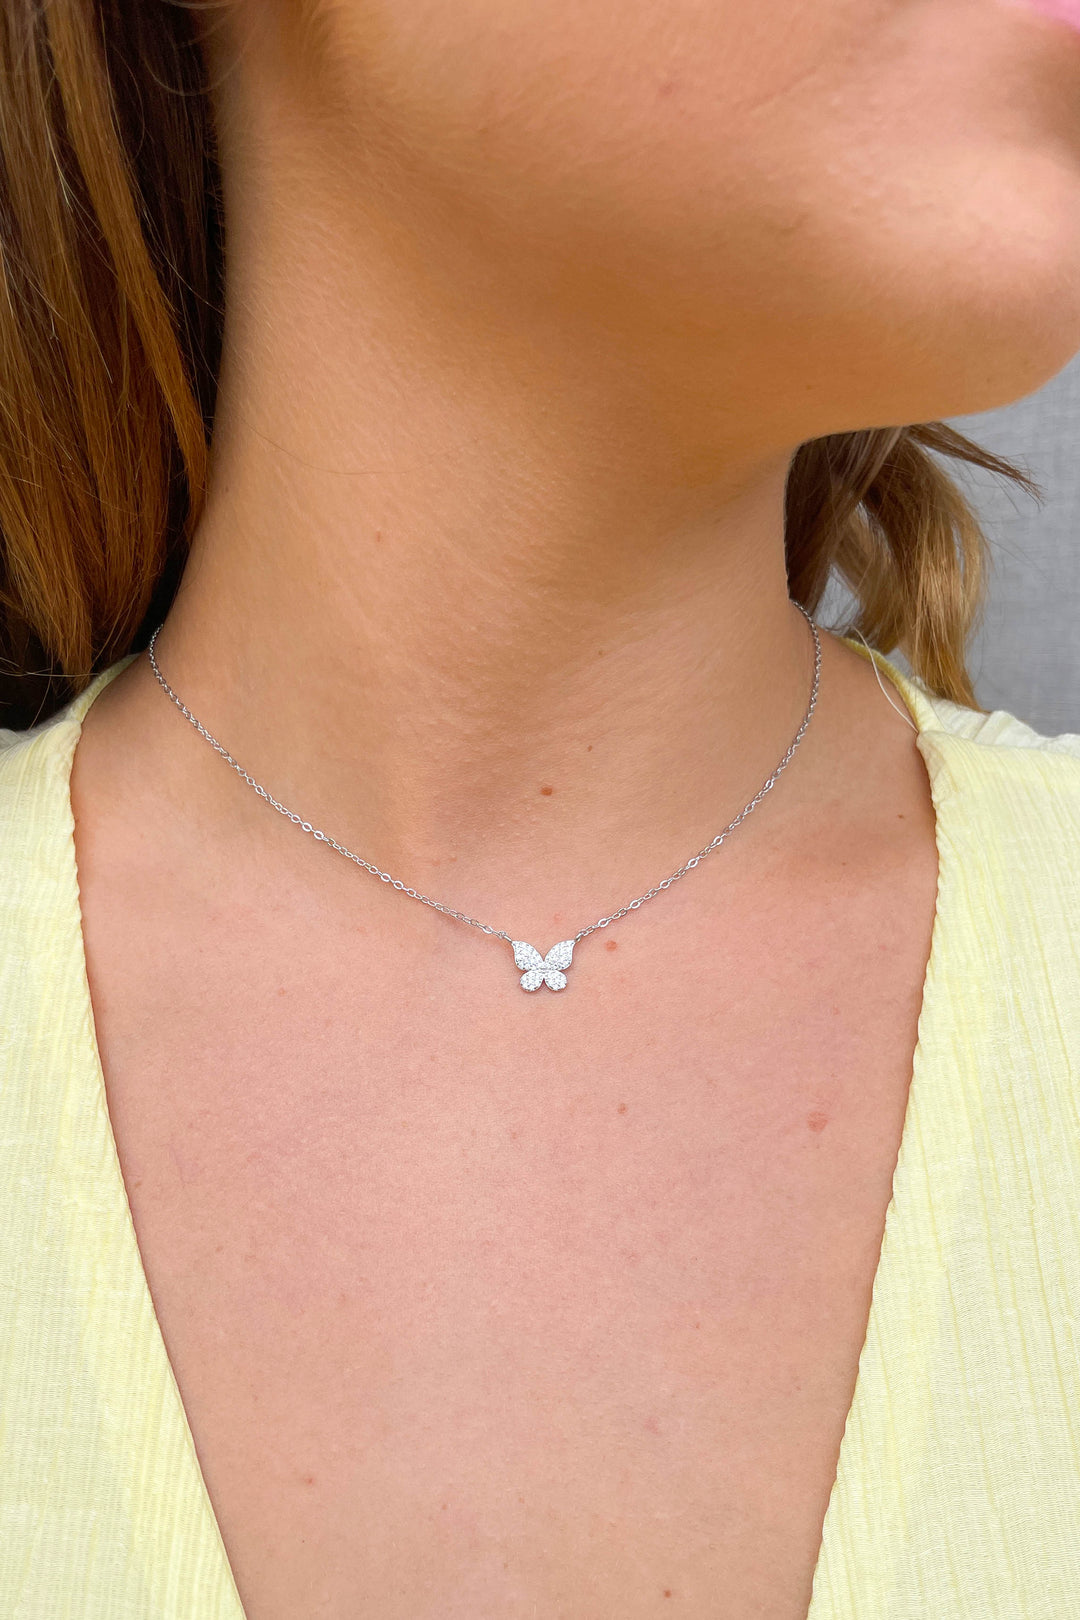 Diamond Butterfly Necklace in Silver